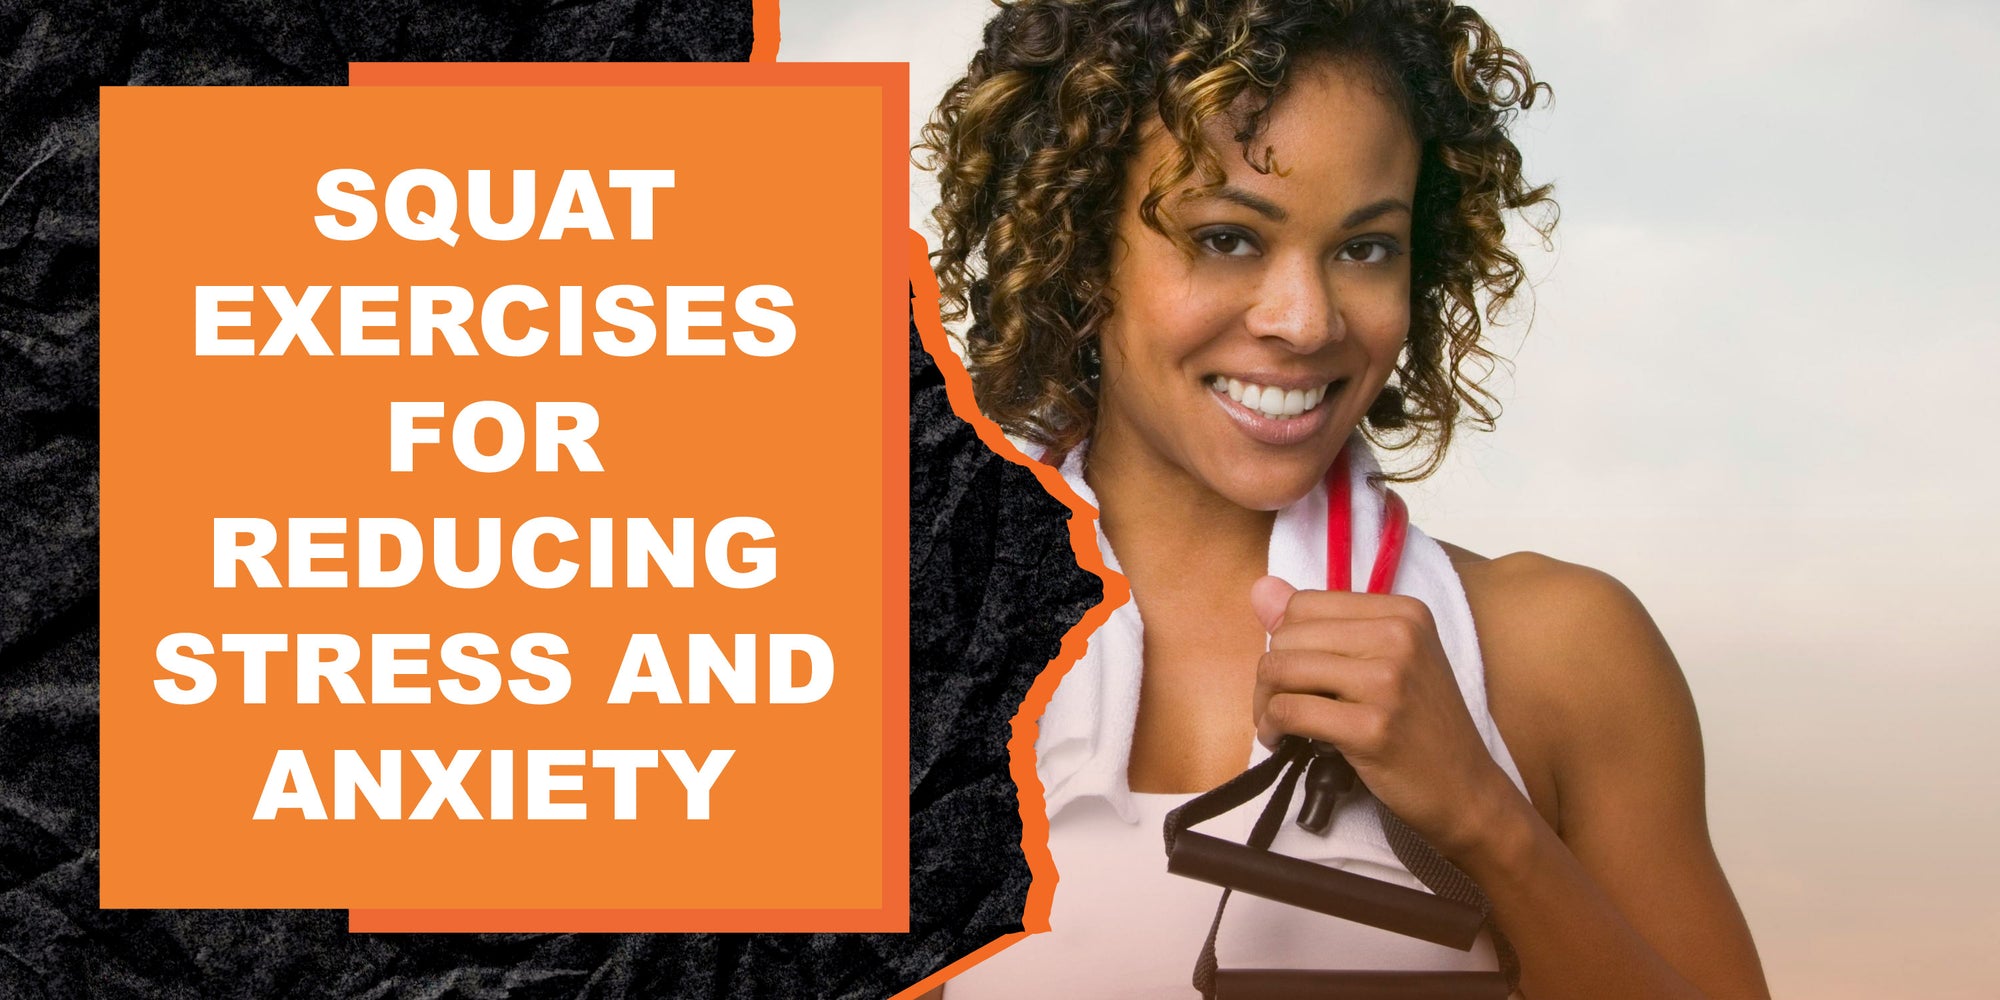 Squat Exercises for Reducing Stress and Anxiety